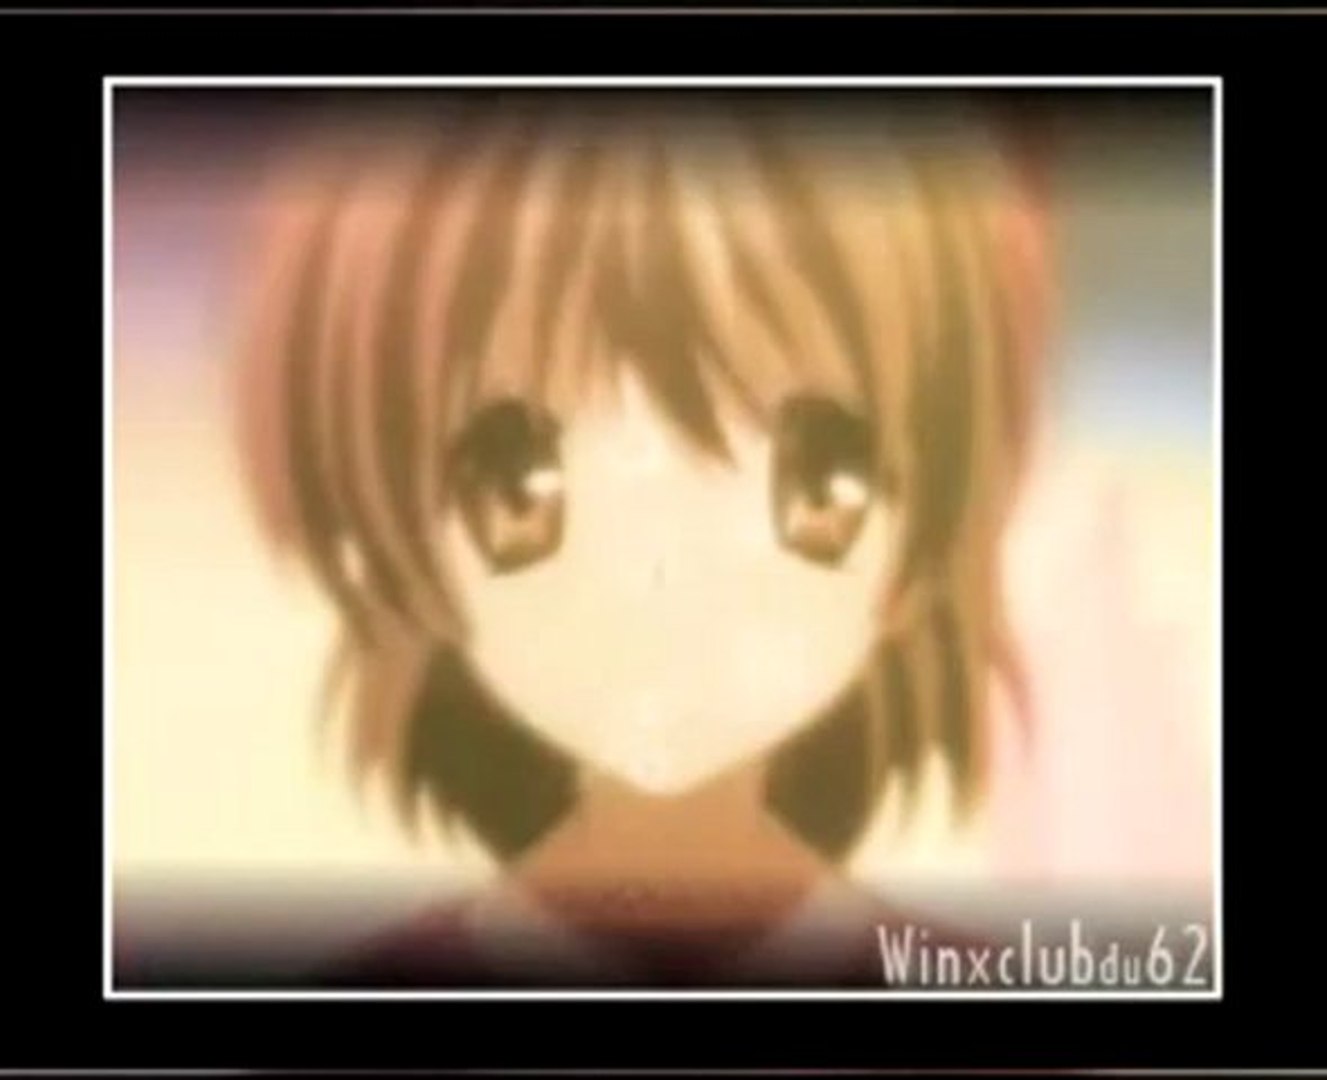 Clannad After Story Opening - video Dailymotion